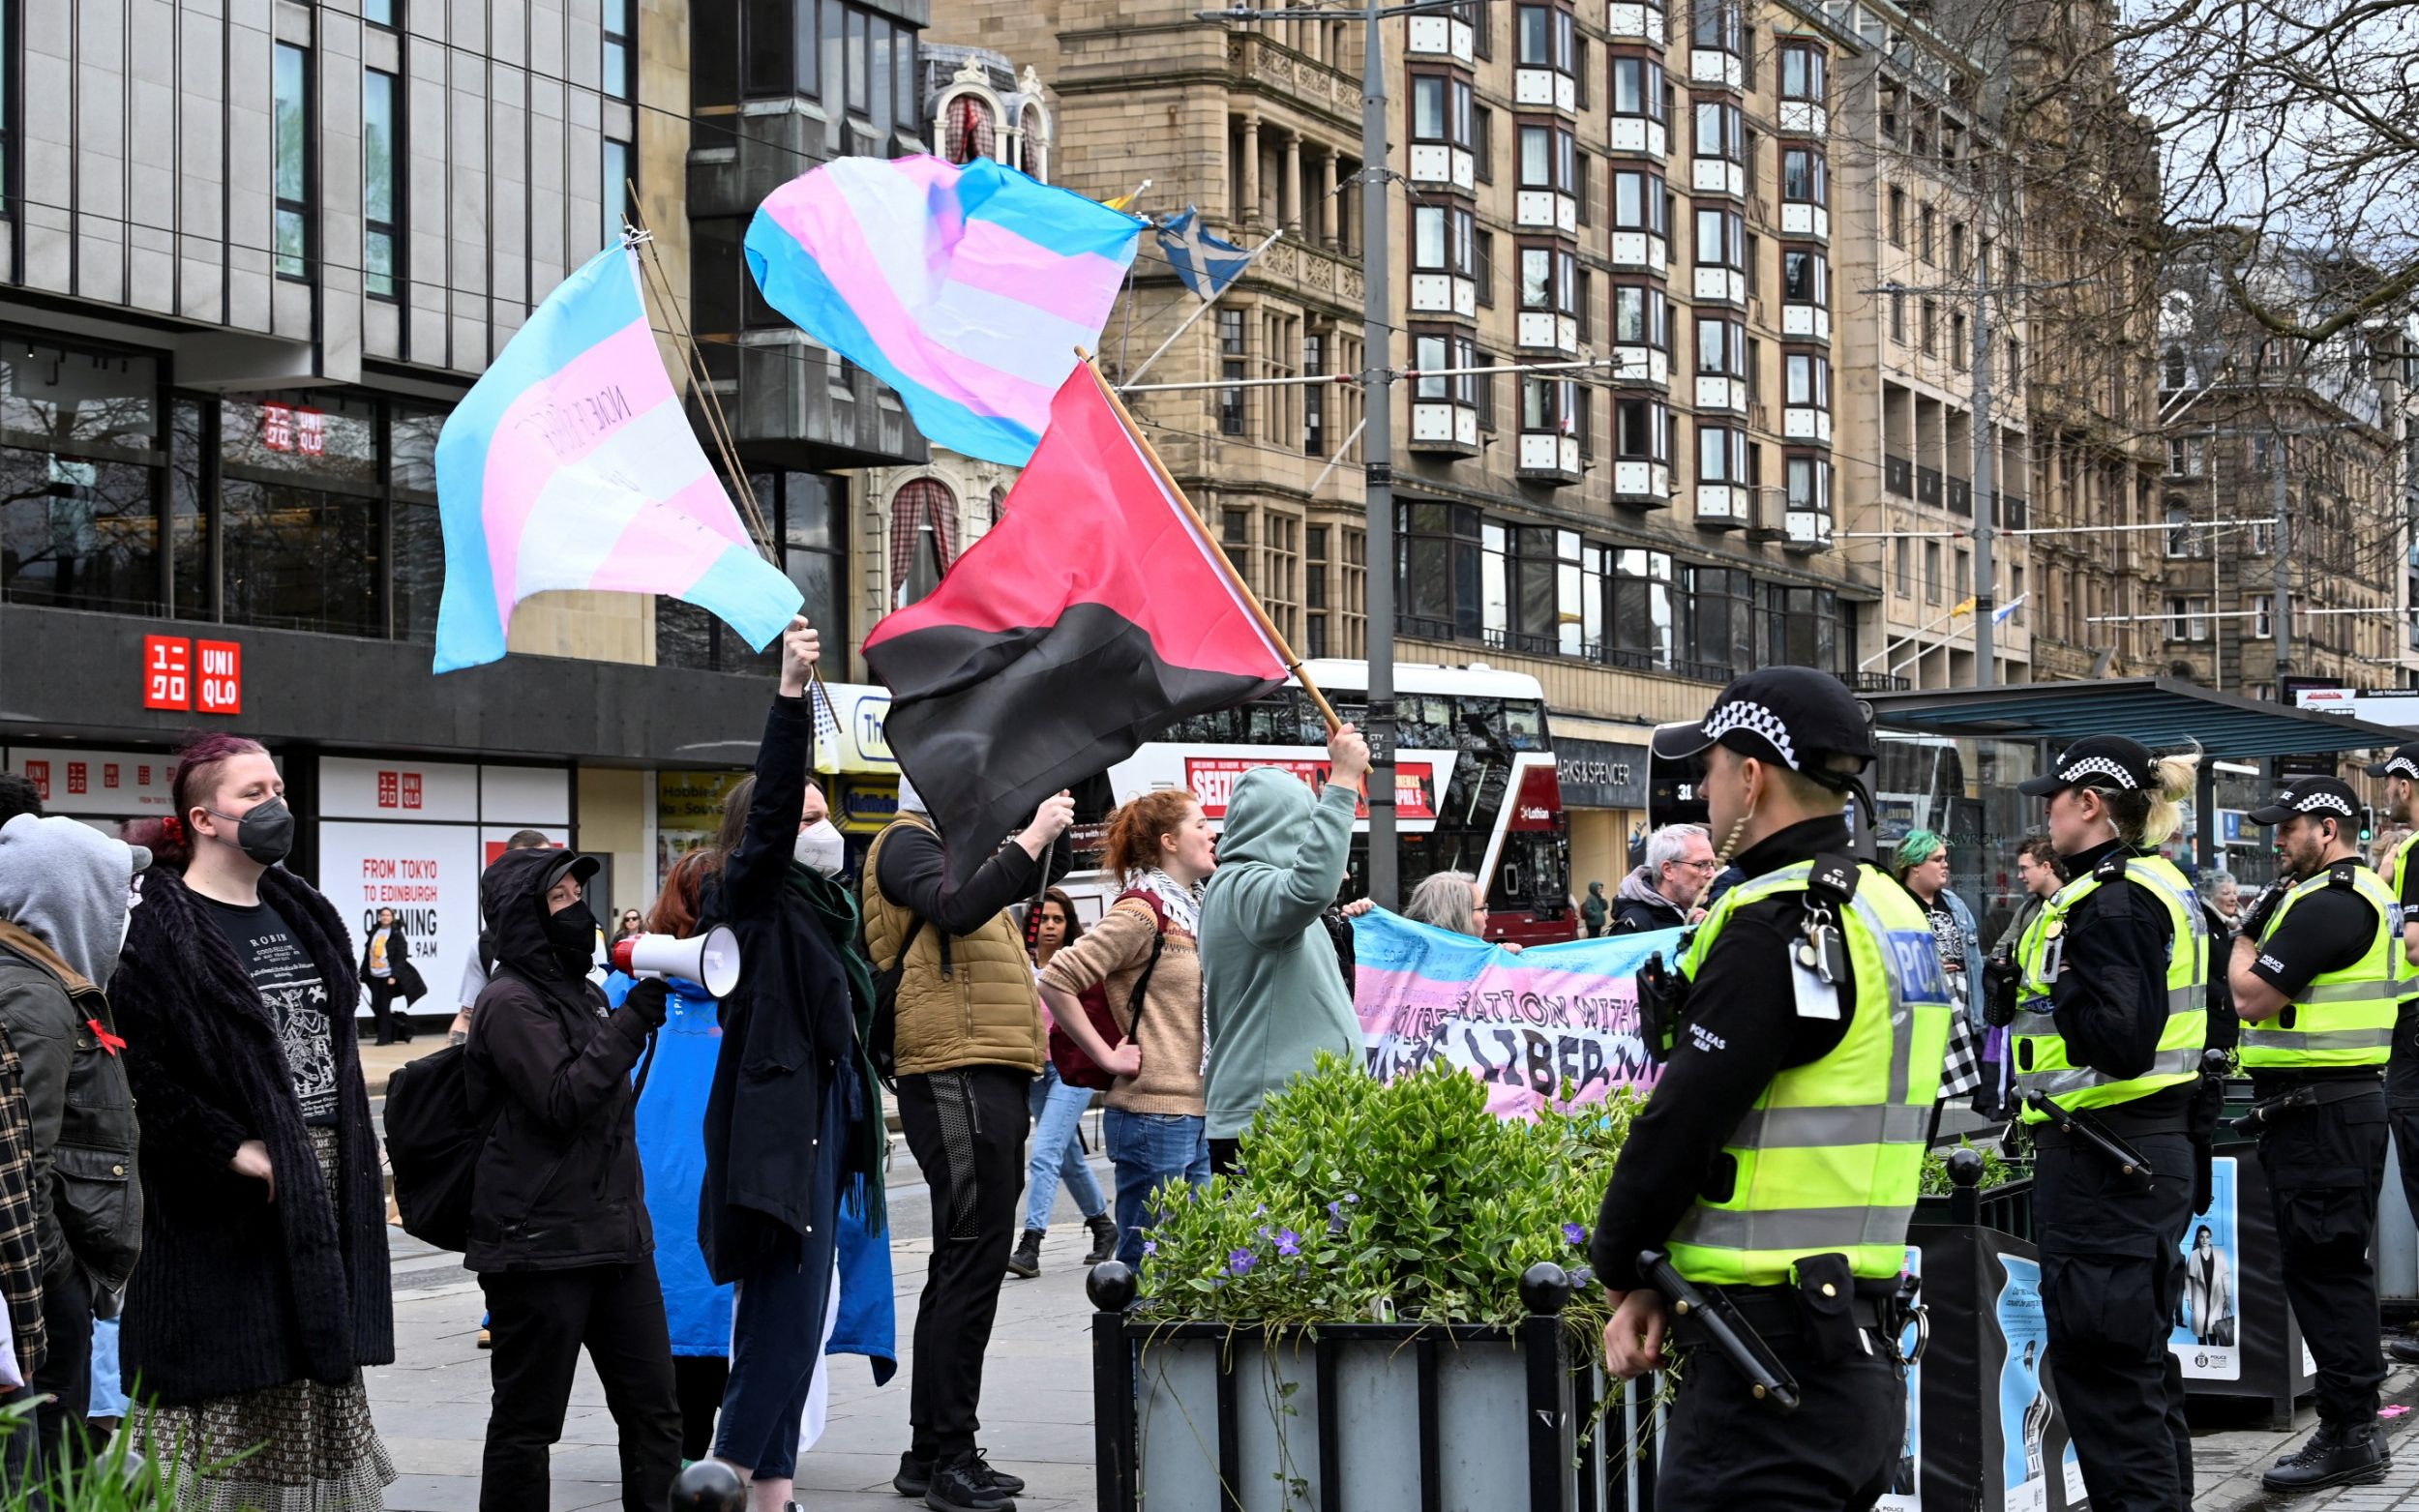 trans ideologists cast themselves as heroes – history will remember them as cowards